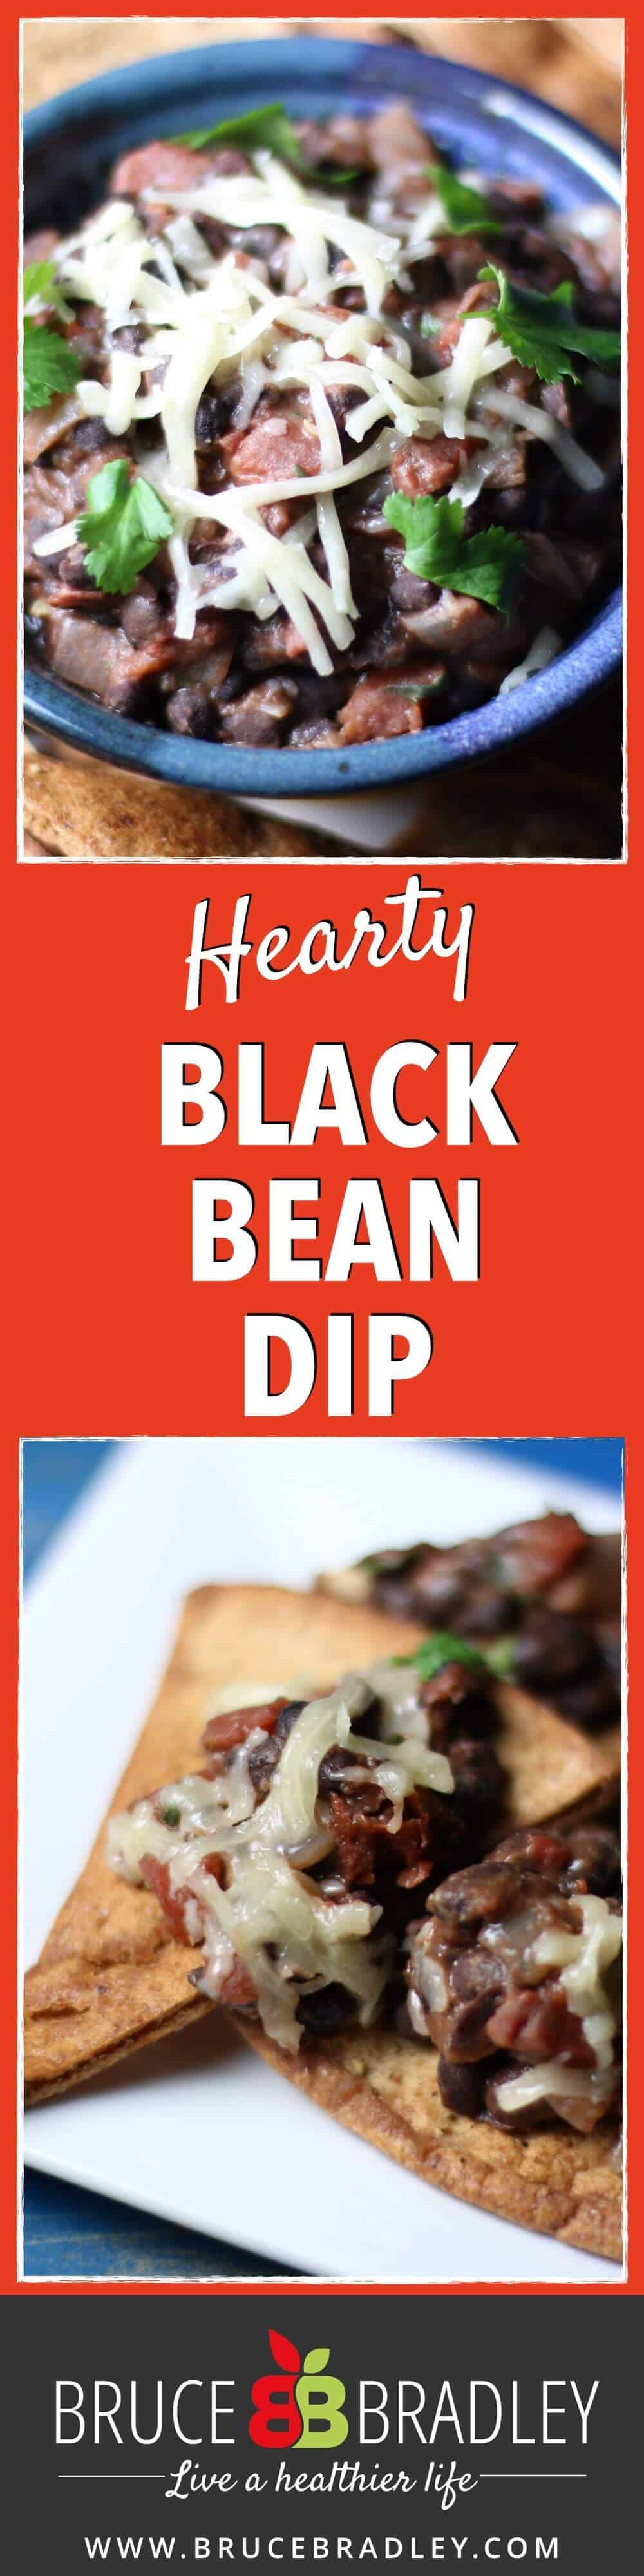 Finding Healthy, Great-Tasting Dips Can Be A Challenge. That'S Why This Hearty Black Bean Dip Recipe Comes In So Handy!